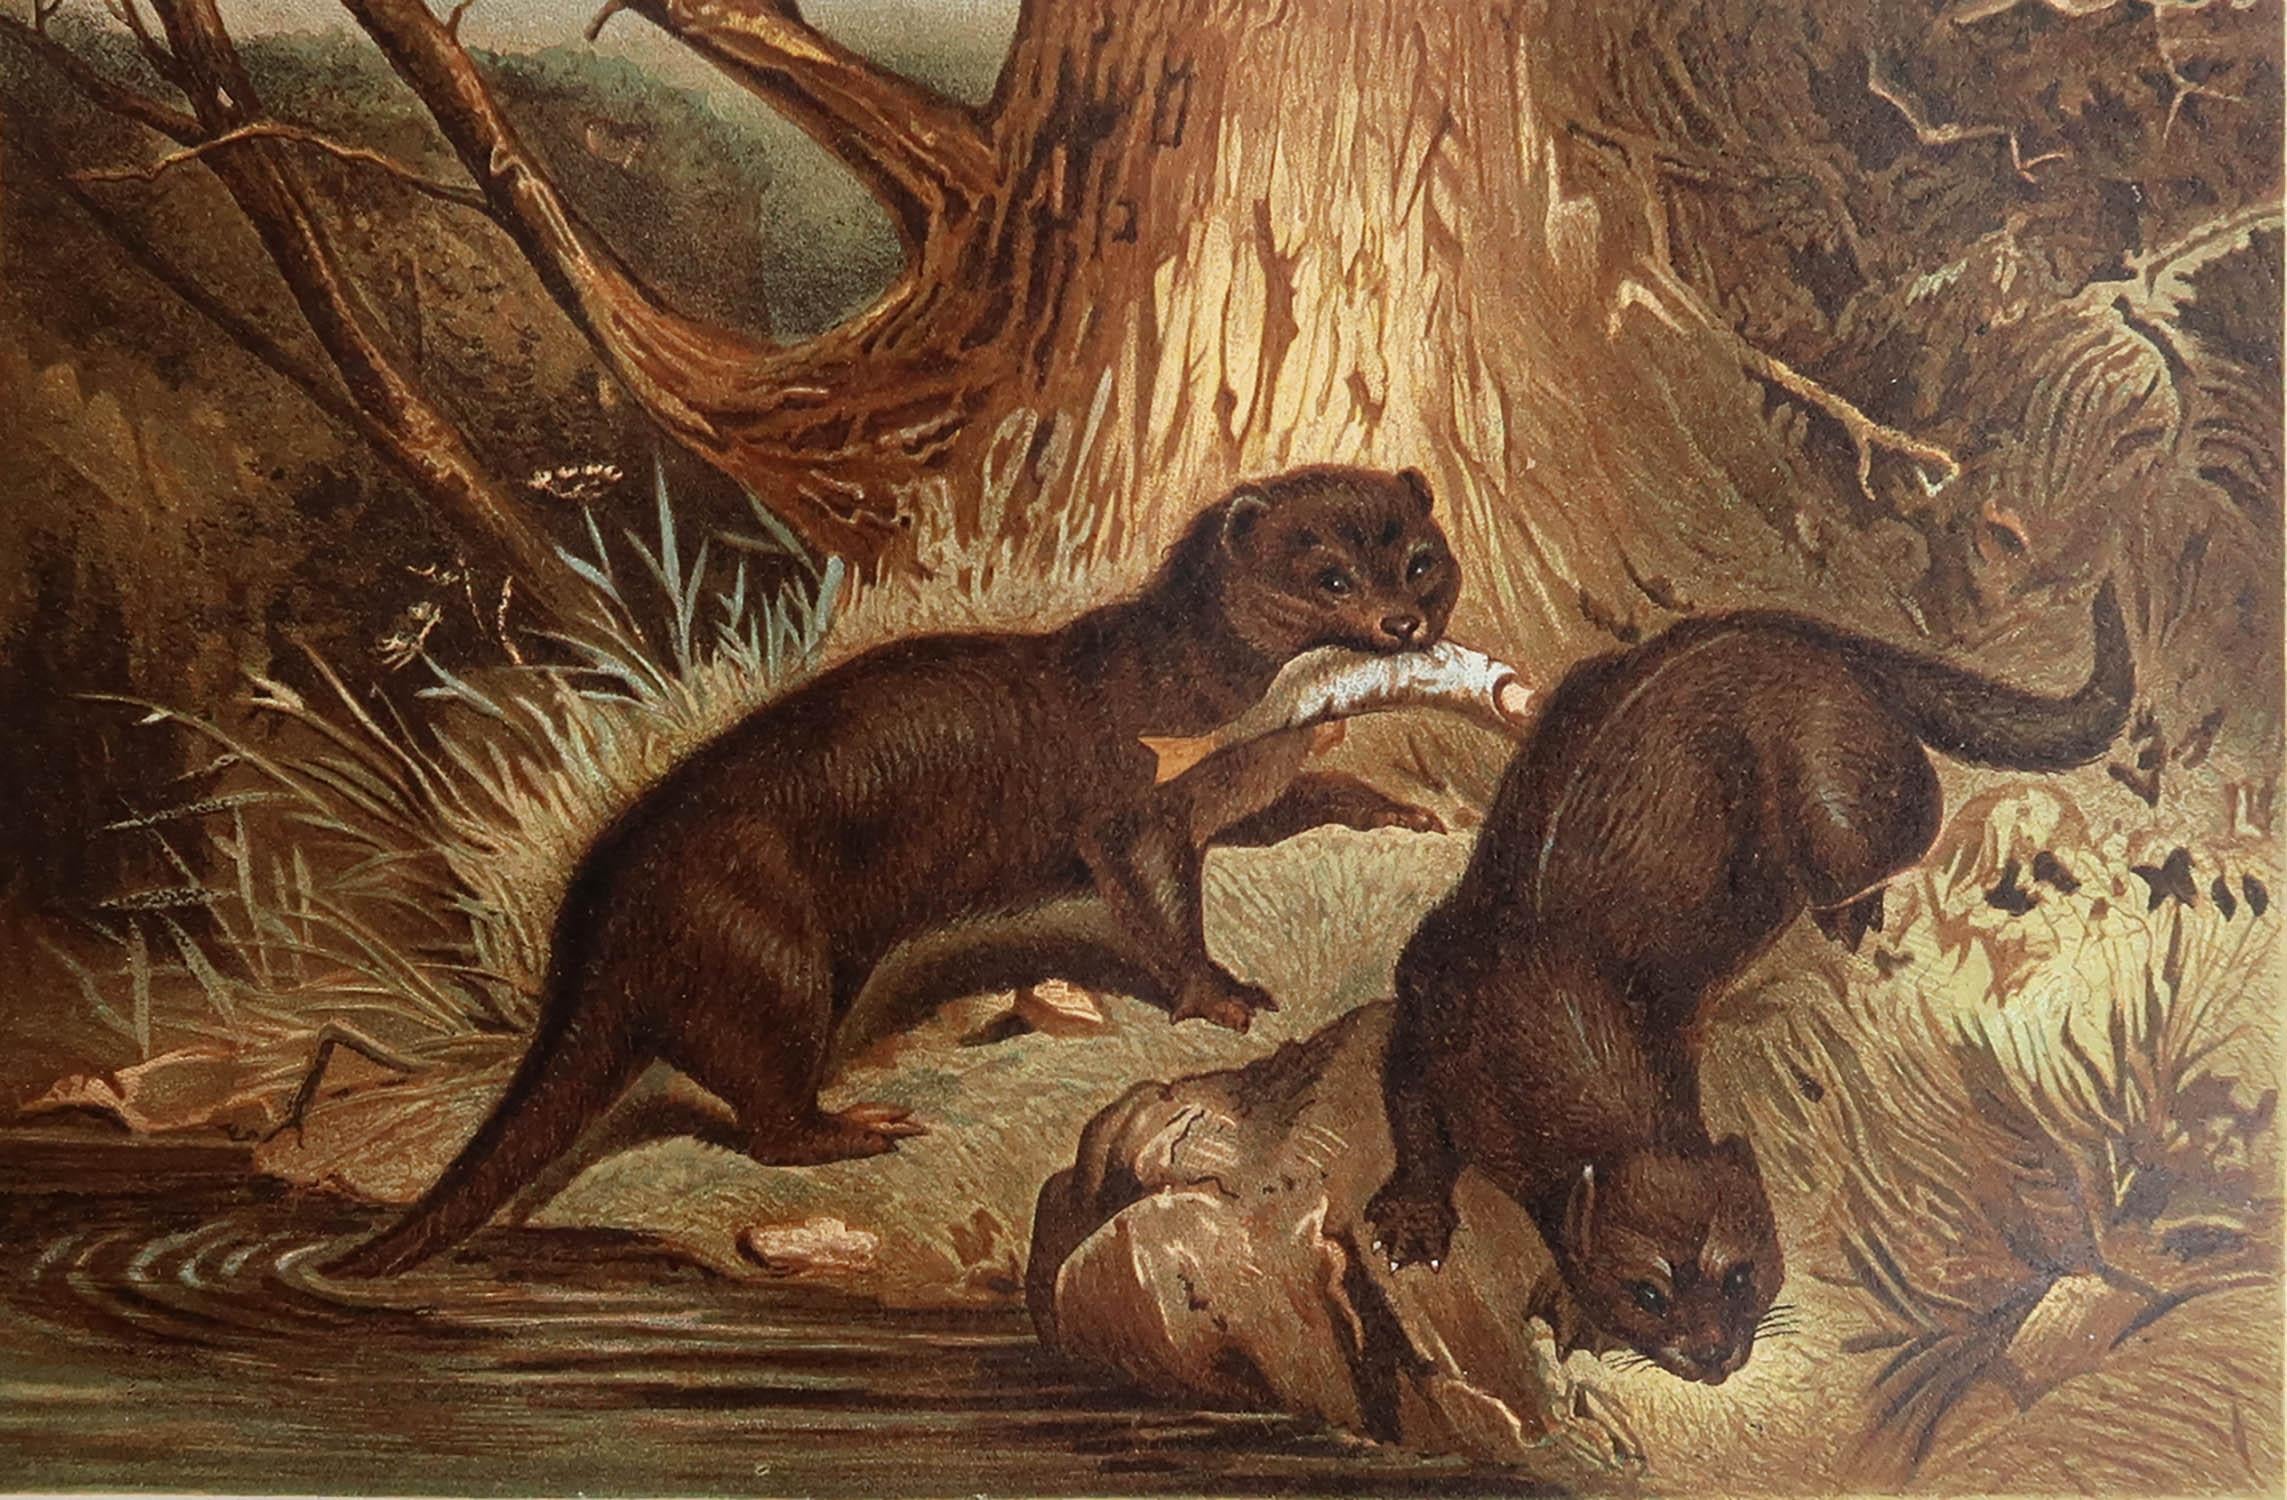 Great image of European Otters

Unframed. It gives you the option of perhaps making a set up using your own choice of frames.

Chromolithograph after the original artwork by P.J Smit

Published by F.Warne, C.1890

Free